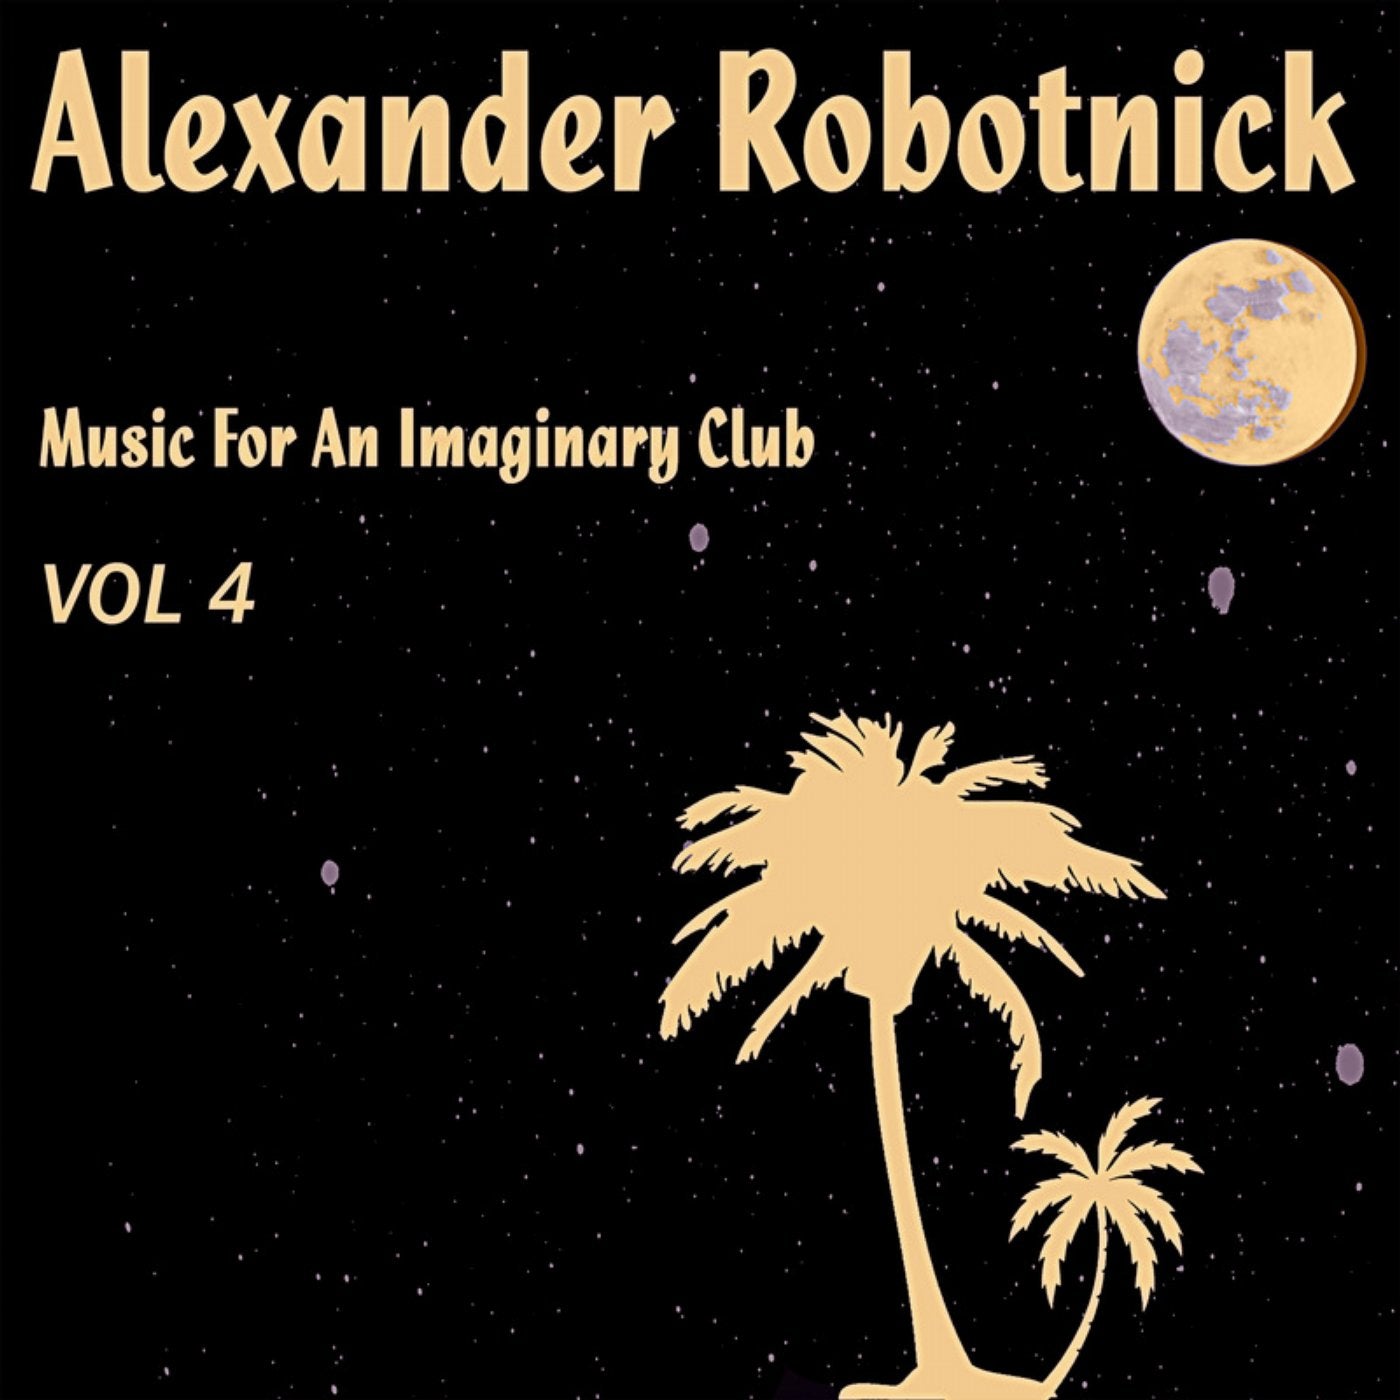 Music For an Imaginary Club Vol. 4